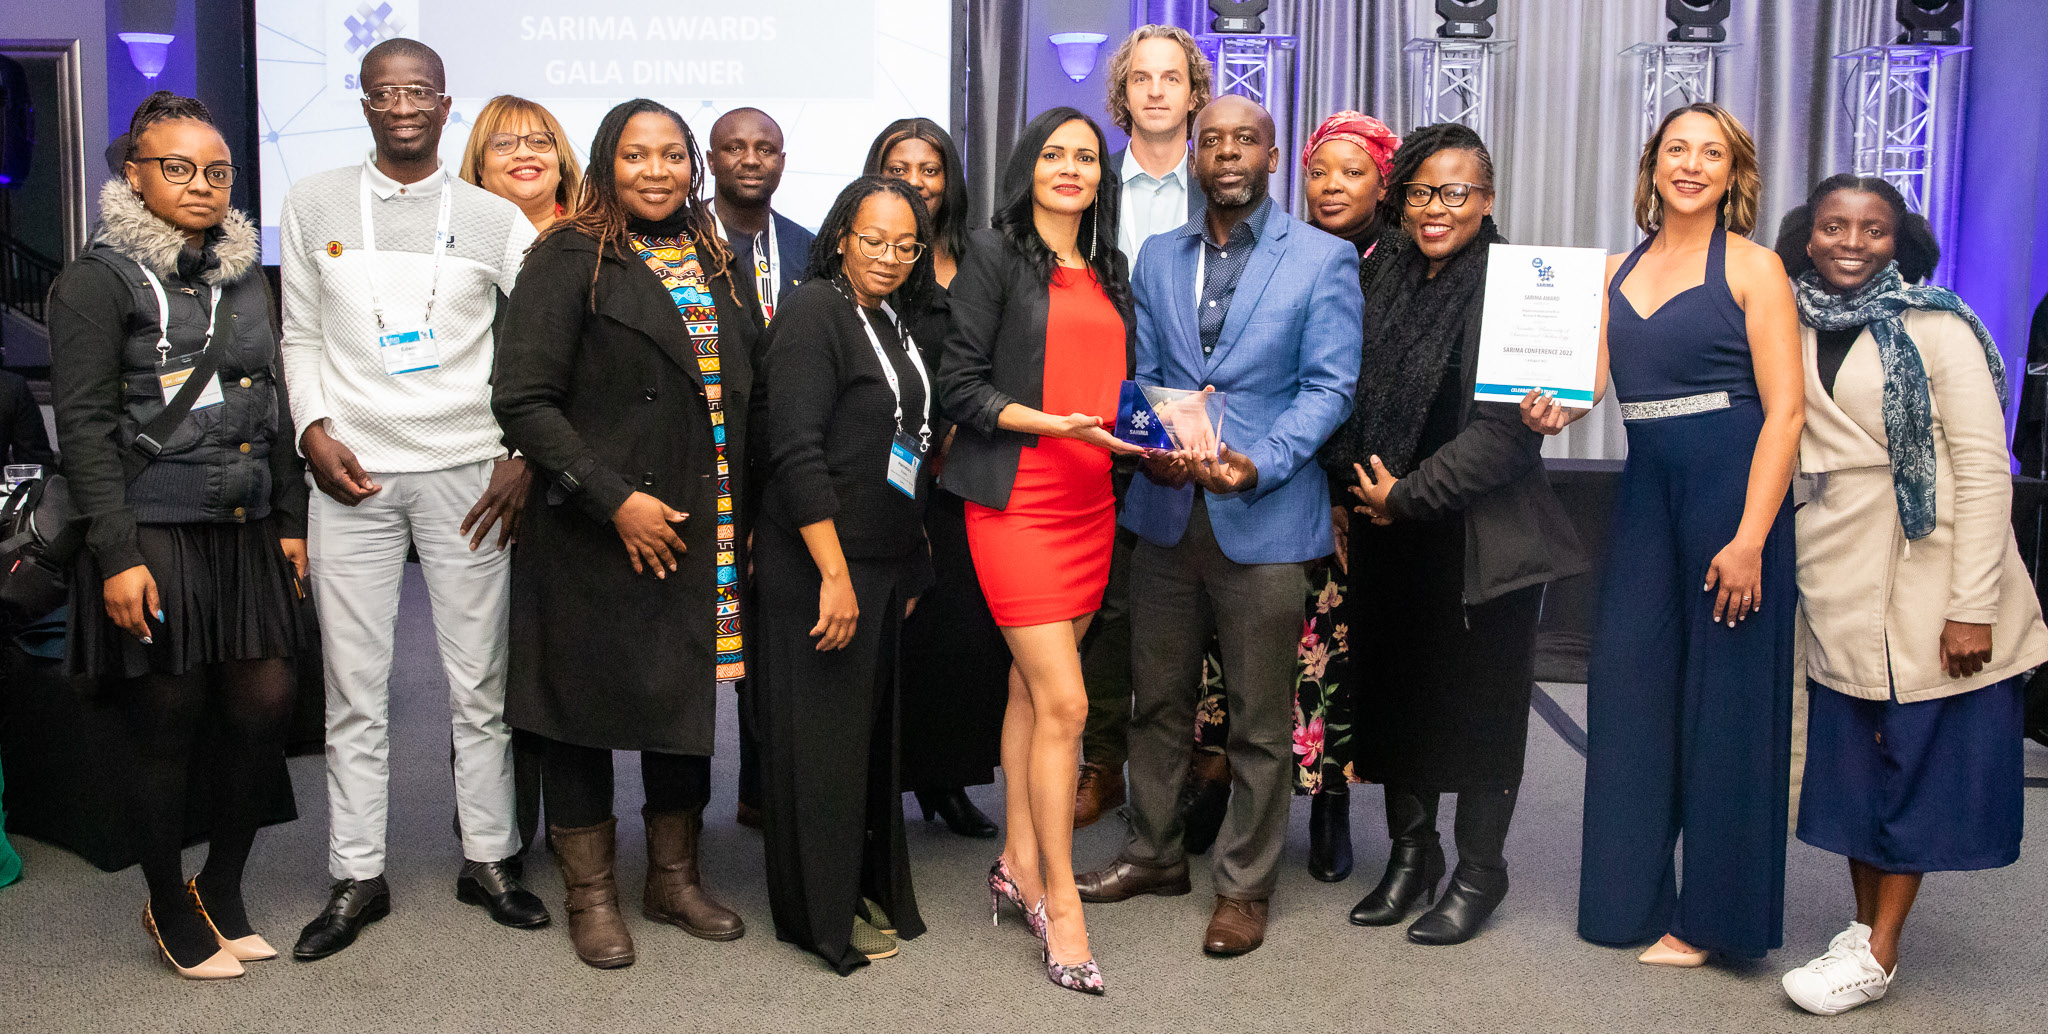 KEEPING NUST ON THE MAP: Dr Lisho Mundia, Director of Research and Innovation, Ministry of Higher Education, Technology and Innovation (fifth from right), pictured with the NUST team, celebrating the big moment in Johannesburg, South Africa.